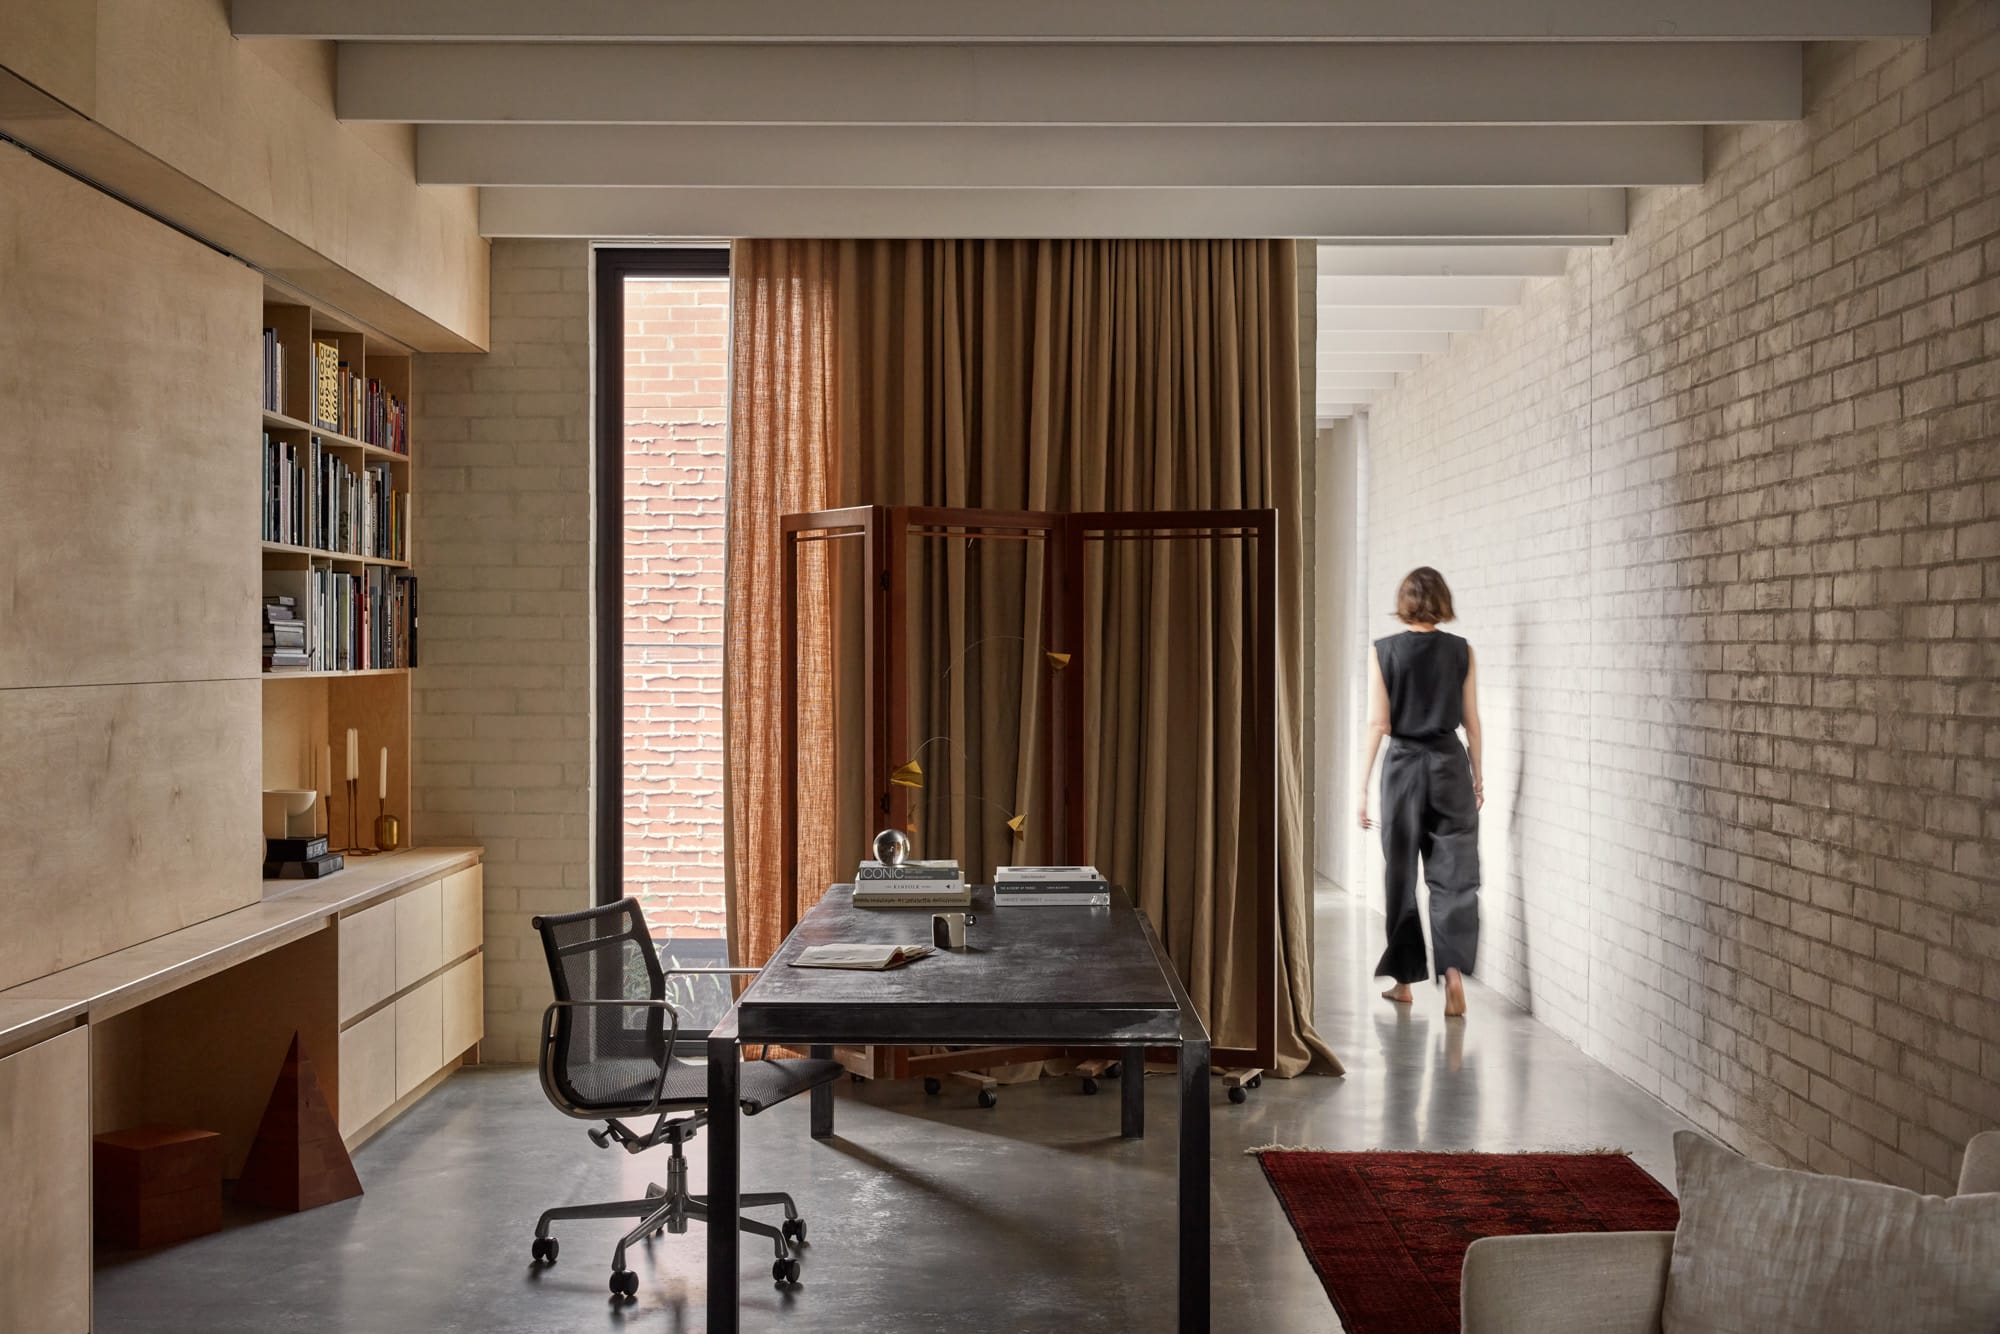 Brick House by Studio Roam. Photography by Jack Lovel. Office space with floor to ceiling plywood bookshelf and storage on left wall. Black desk in centre of room. Brick wall on right hand side running down hallway. 